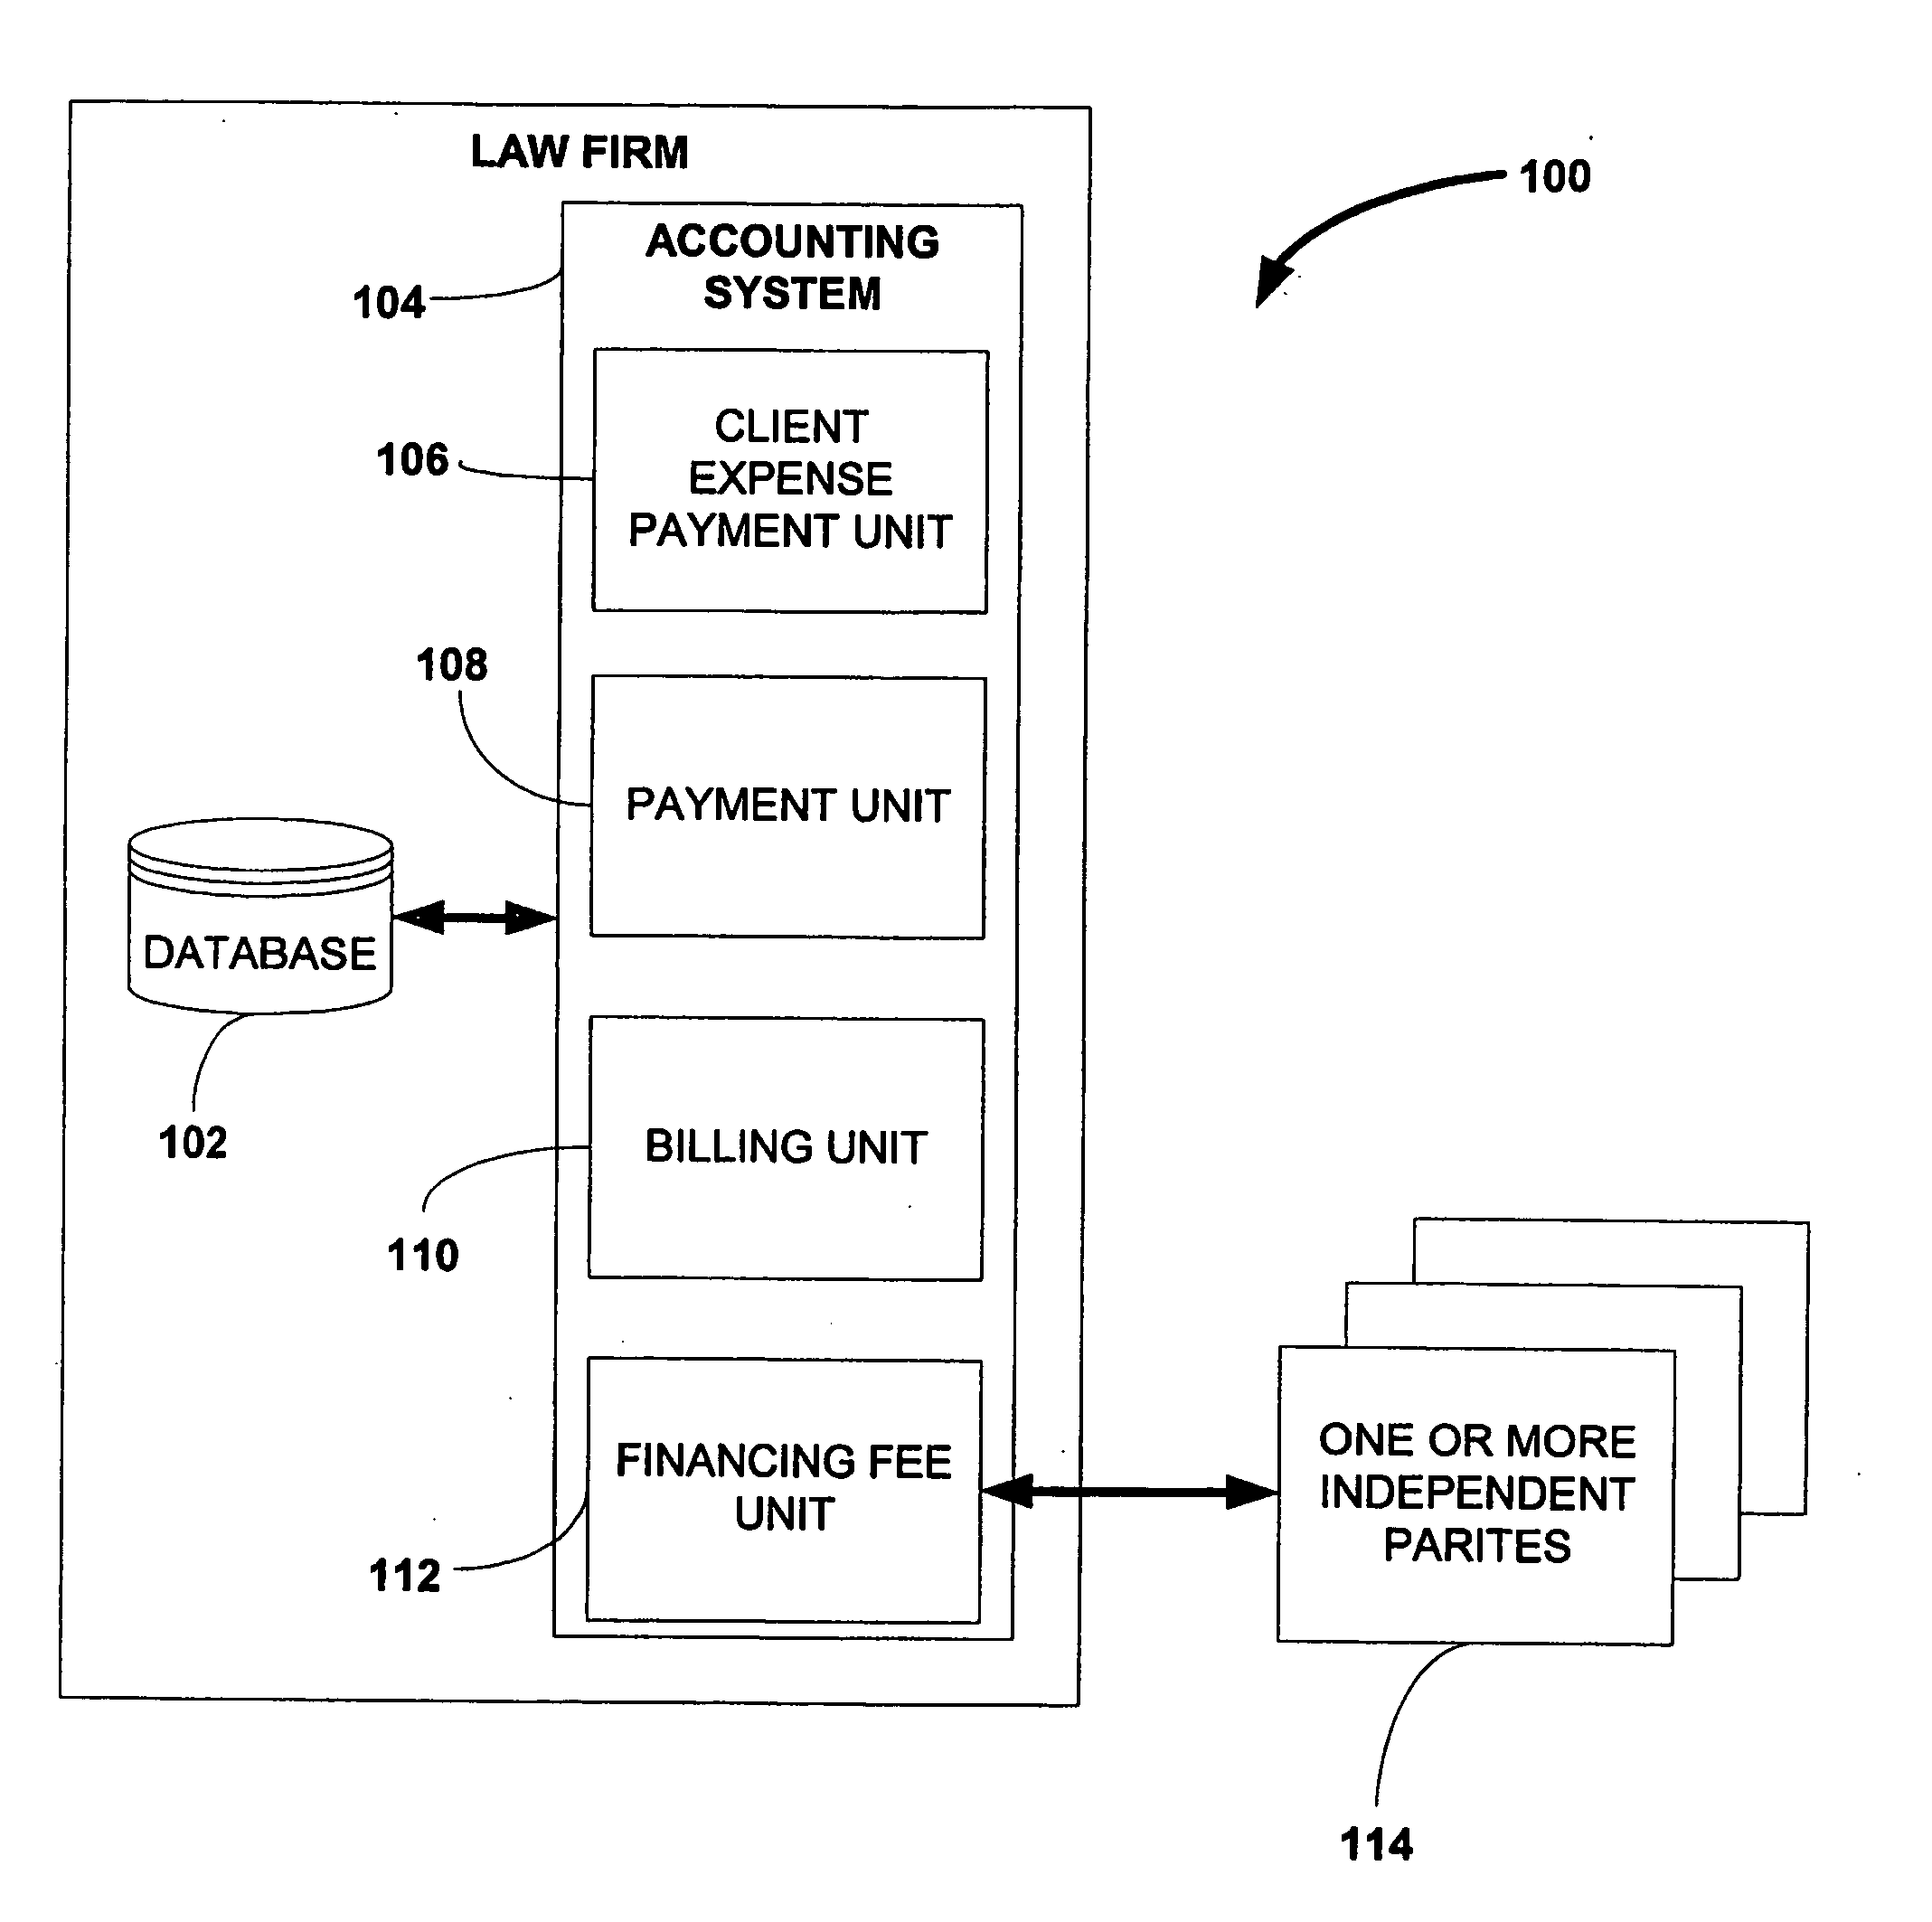 Method and apparatus for covering costs of law firm out-of-pocket expenses